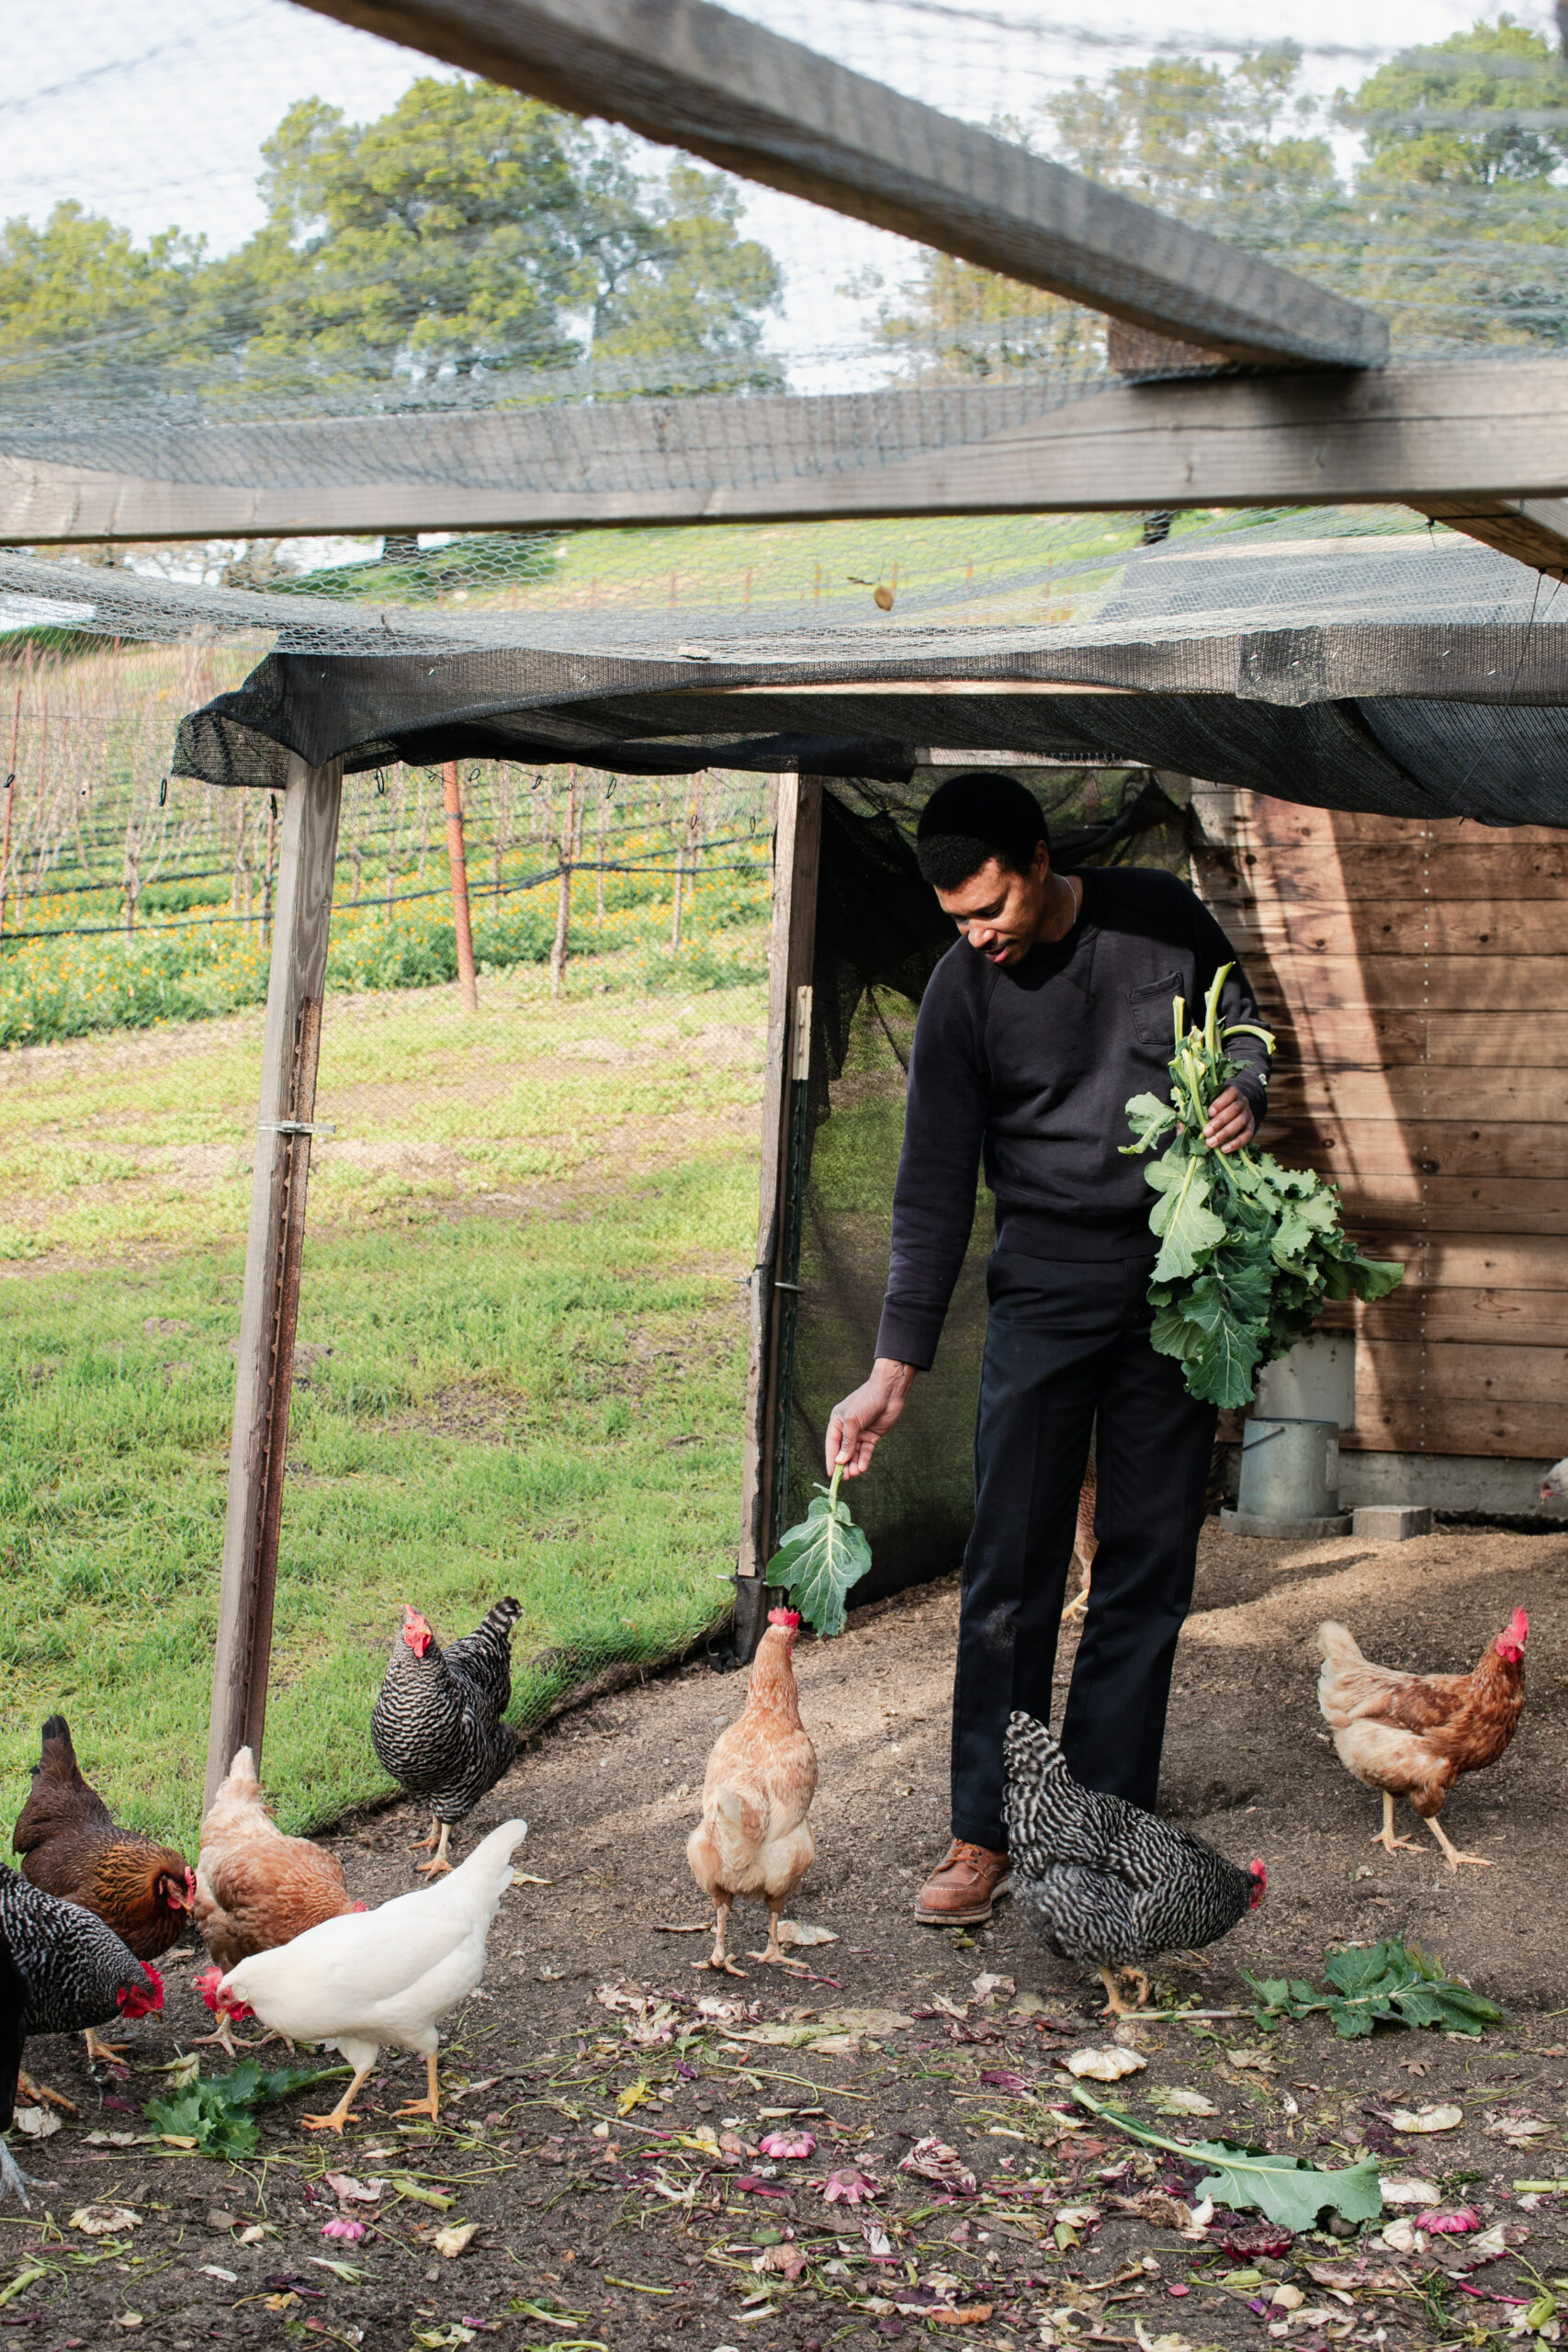 Carter often tends to the garden and chickens alone, while listening to audiobooks about farming and food. (Eileen Roche/for Sonoma Magazine)